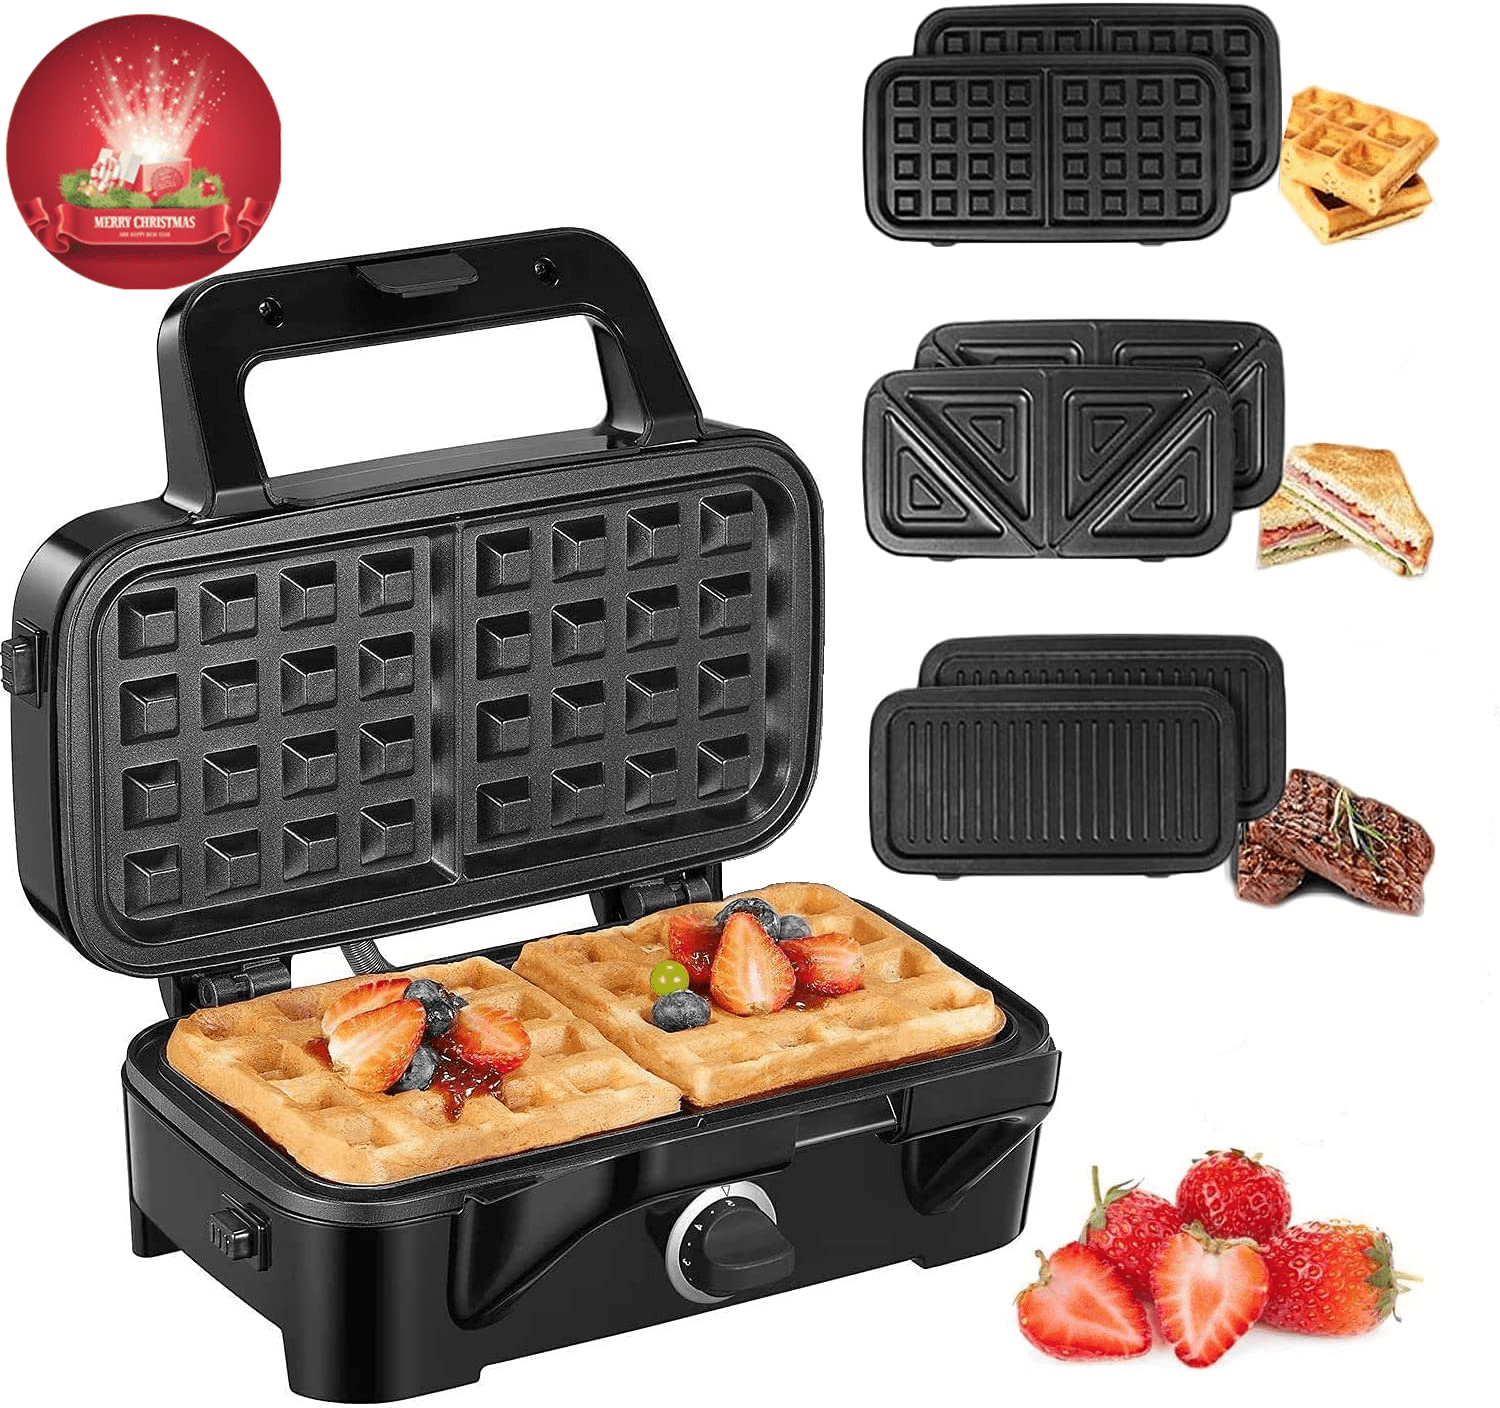  FOHERE 3-in-1 Sandwich Maker, Waffle Maker, Sandwich Grill,  Portable Electric Panini Press with Removable Non-Stick Plates, LED  Indicator Lights, Cool Touch Handle, Toaster, Grilled Cheese Machine: Home  & Kitchen